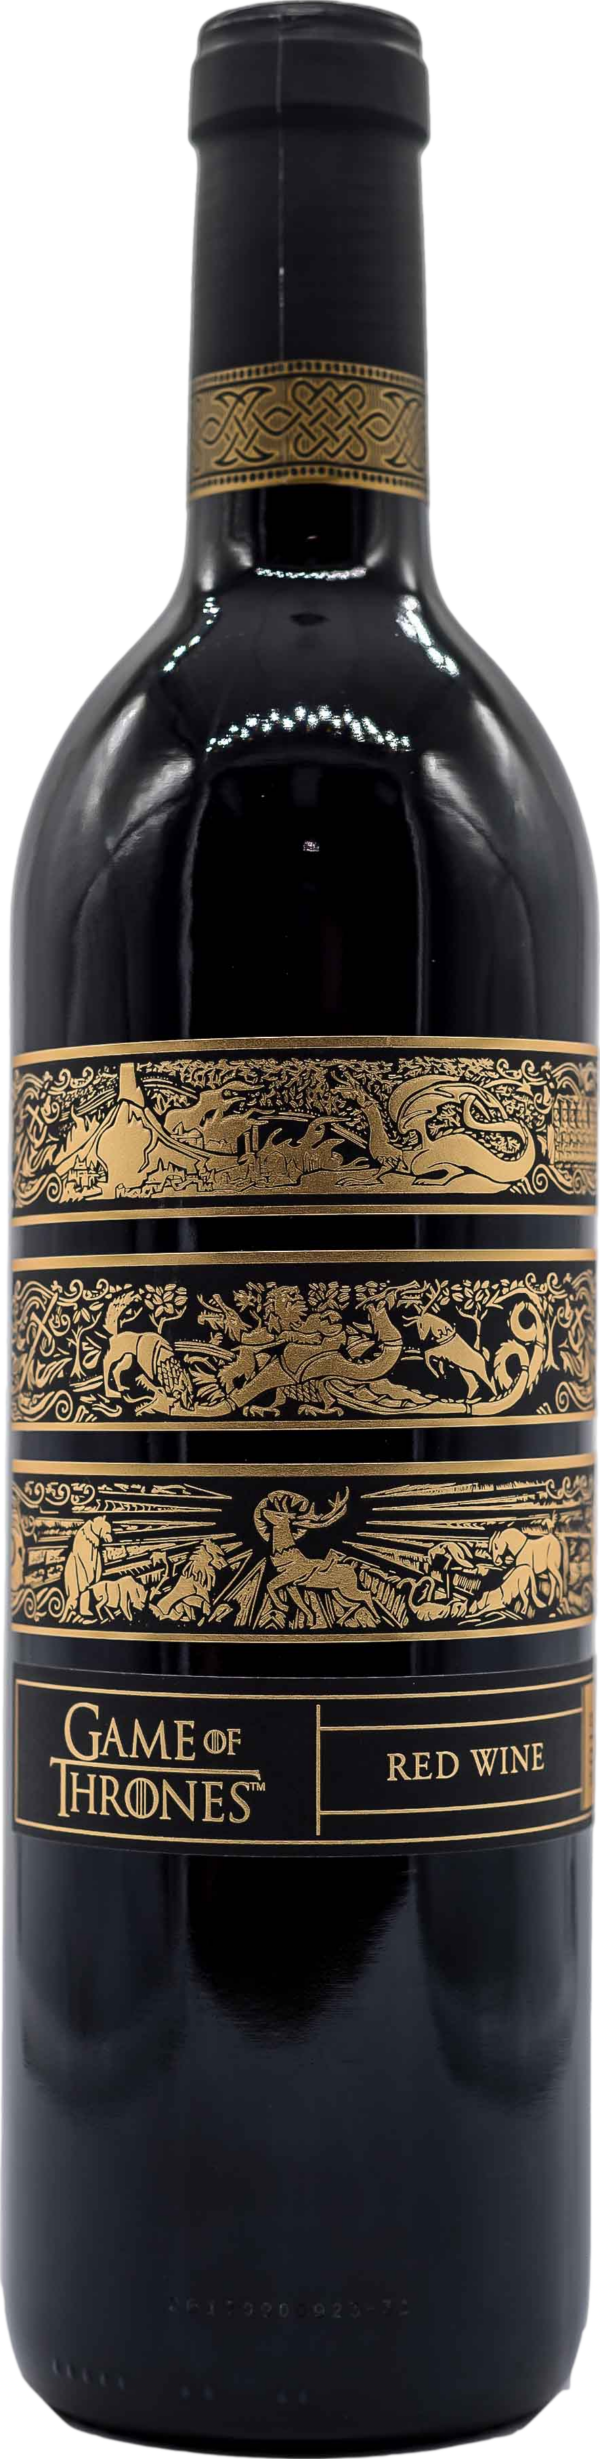 Product image of Game of Thrones Red Wine Paso Robles 2017 from 8wines